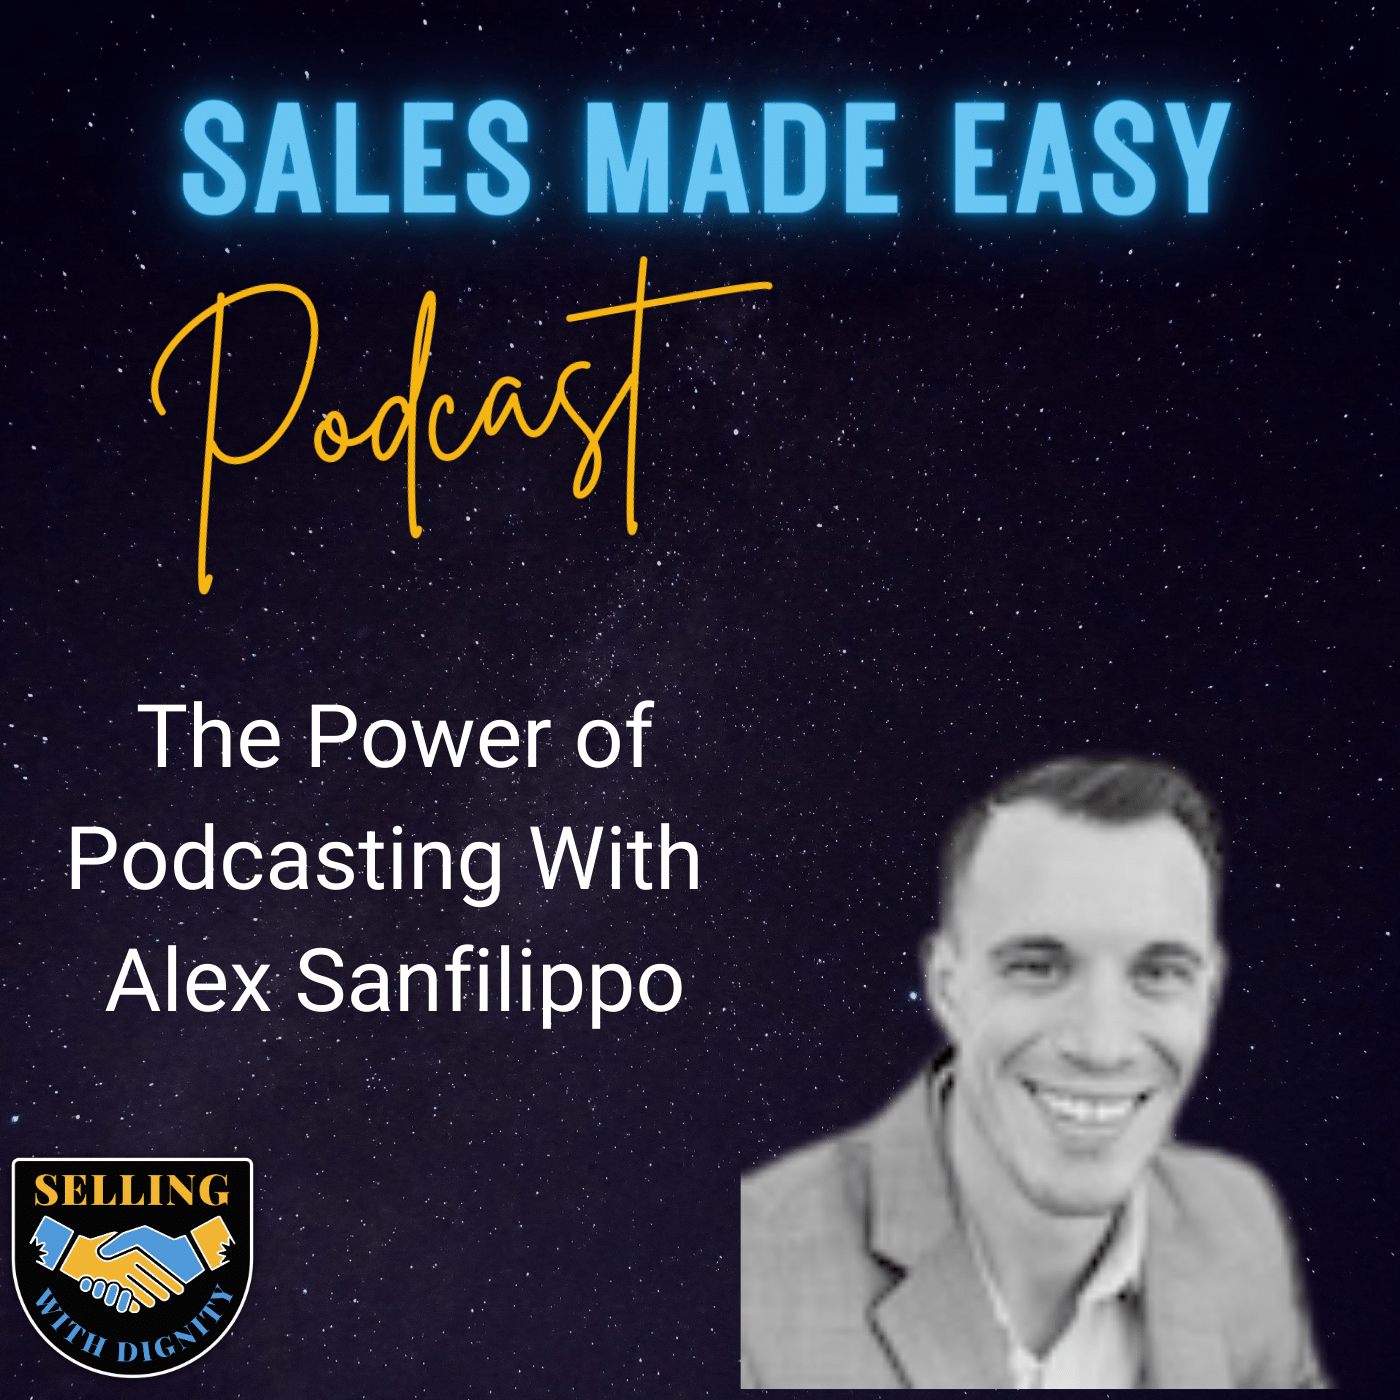 The Power of Podcasting With Alex Sanfilippo